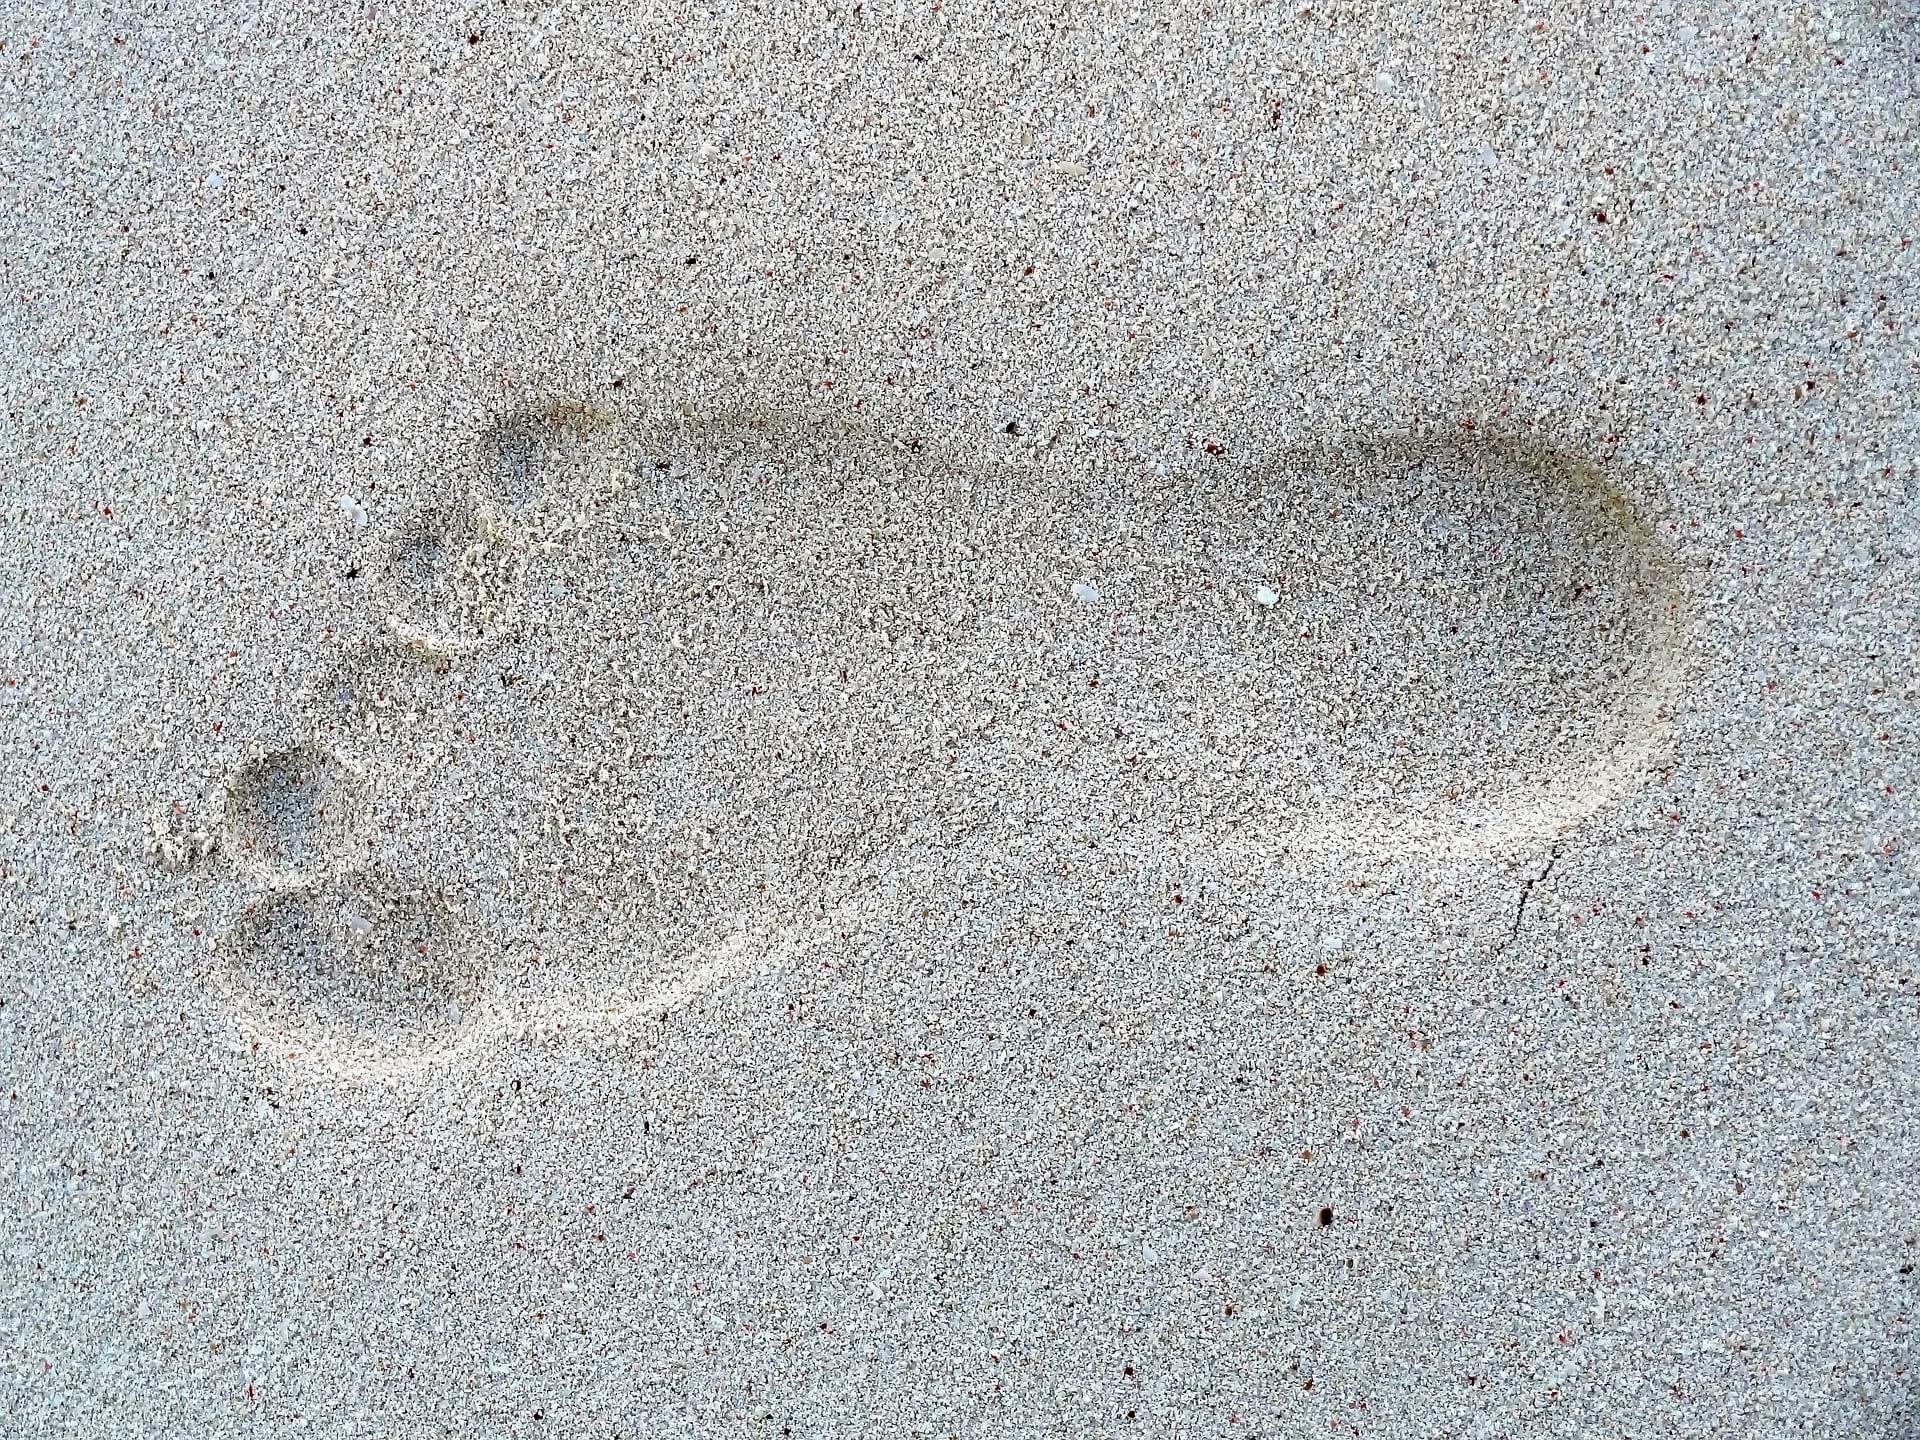 Get Inspired By These Baby Footprint Tattoo Ideas